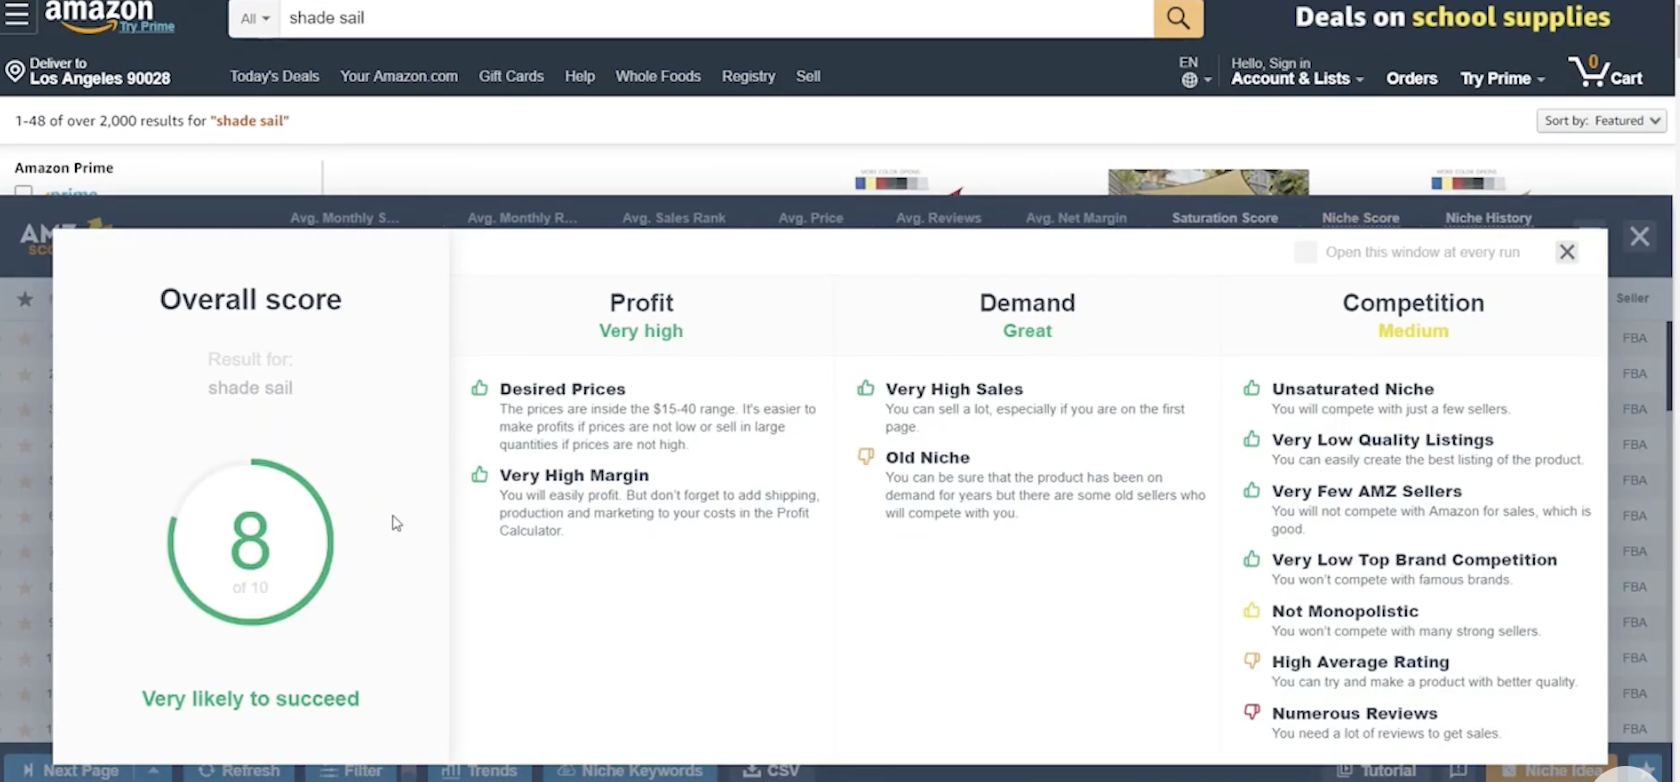 Amazon Scout Pro: Extensions and plugins for Amazon in Google Chrome